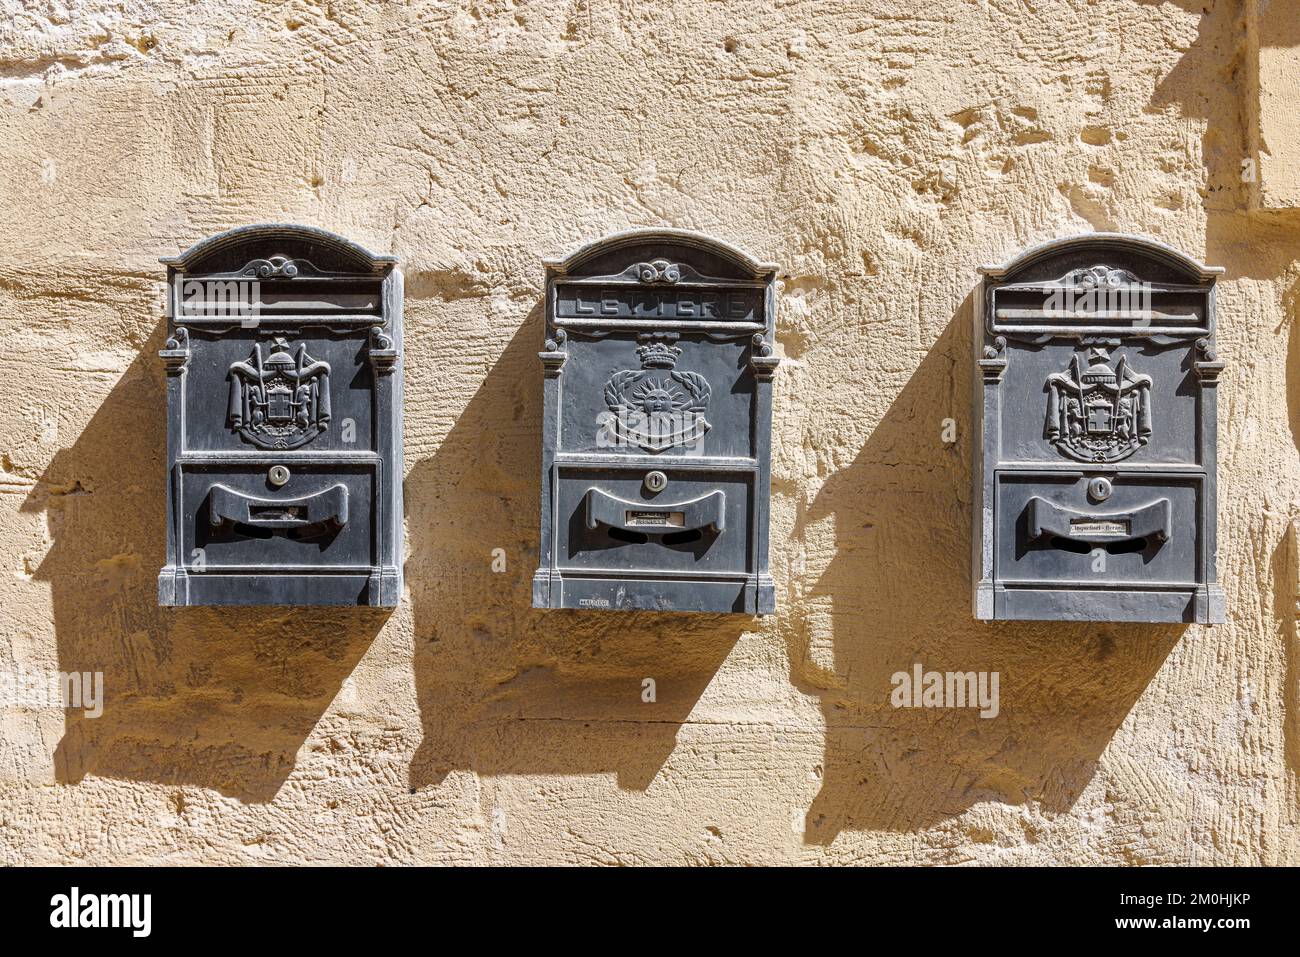 Italy, Basilicata, Matera, The Sassi and the park of the rupestrian churches listed as World Heritage by UNESCO, Sasso Barisano, mailboxes Stock Photo